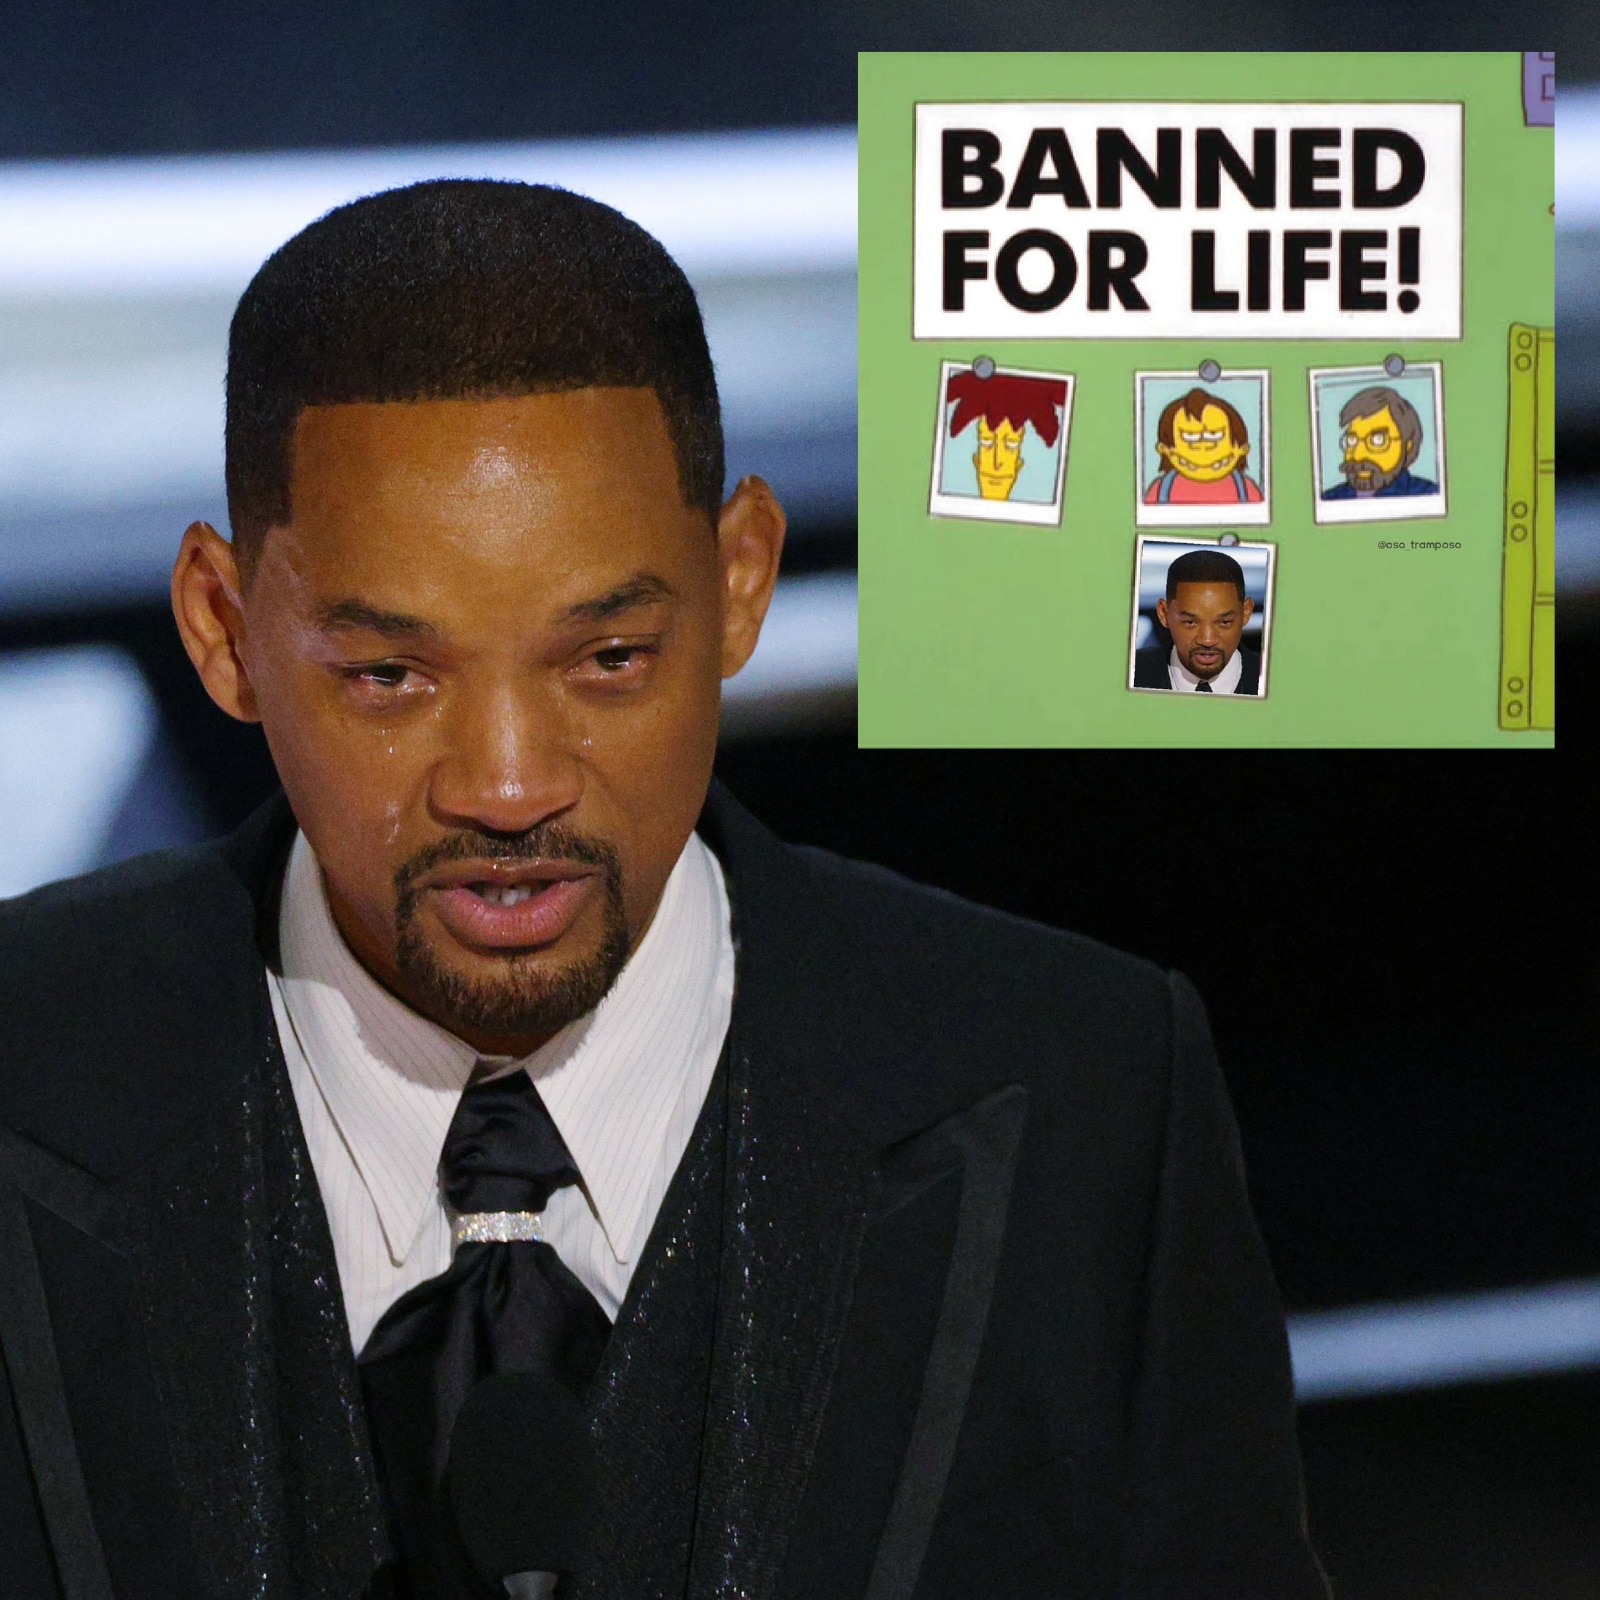 Internet Reacts to Will Smith, Chris Rock Clash With Movie Memes